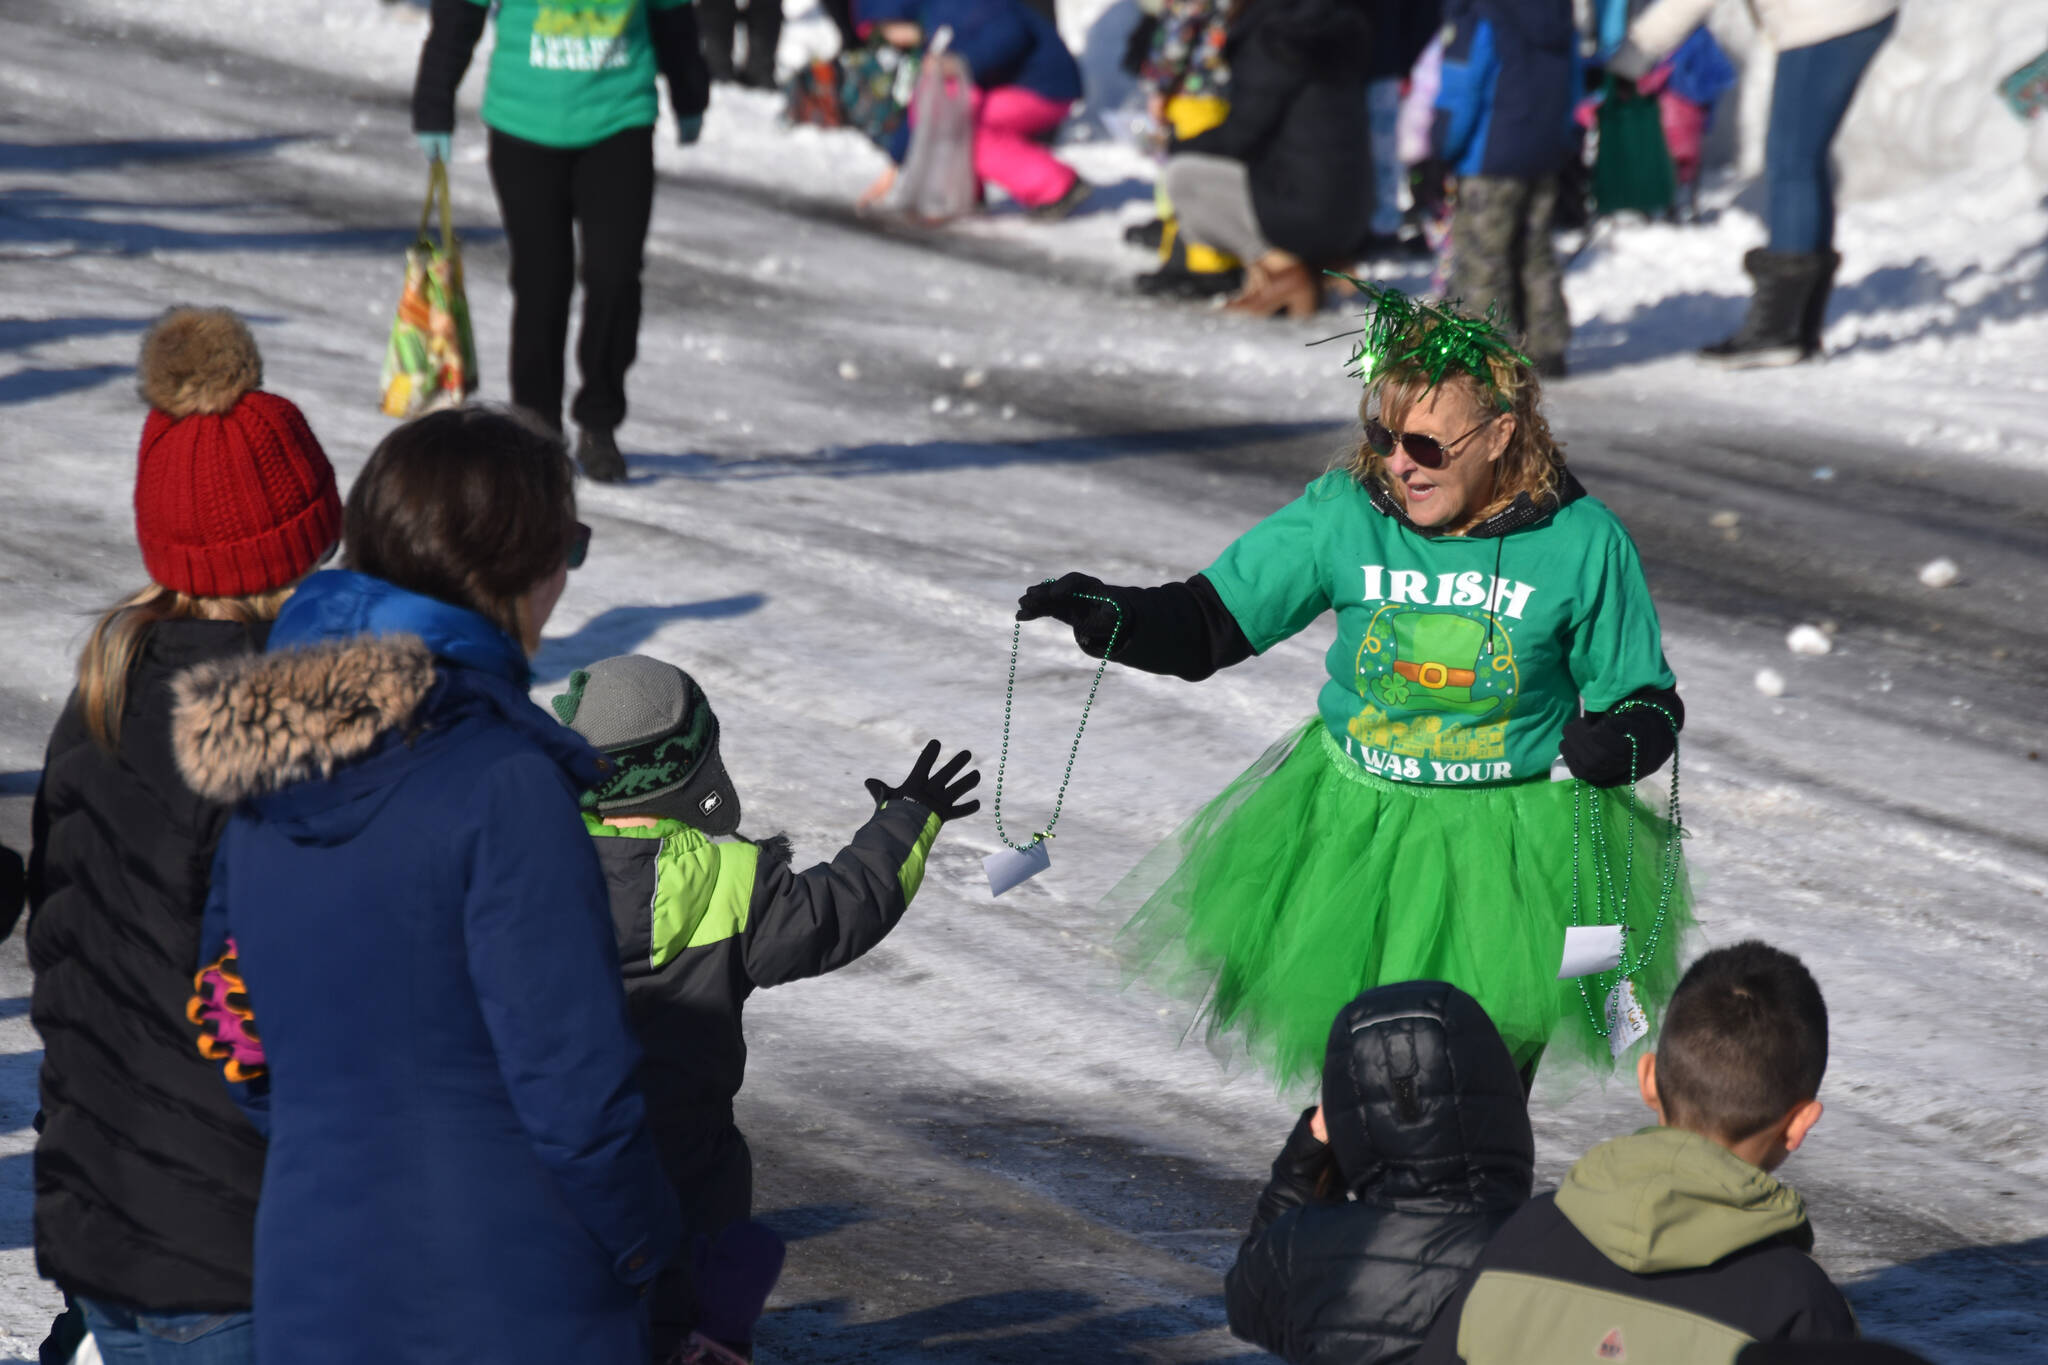 Green bead necklaces are passed out as the 32nd annual Sweeney’s St. Patrick’s Day Parade proceeds down Fireweed Street in Soldotna, Alaska on Friday, March 17, 2023. (Jake Dye/Peninsula Clarion)